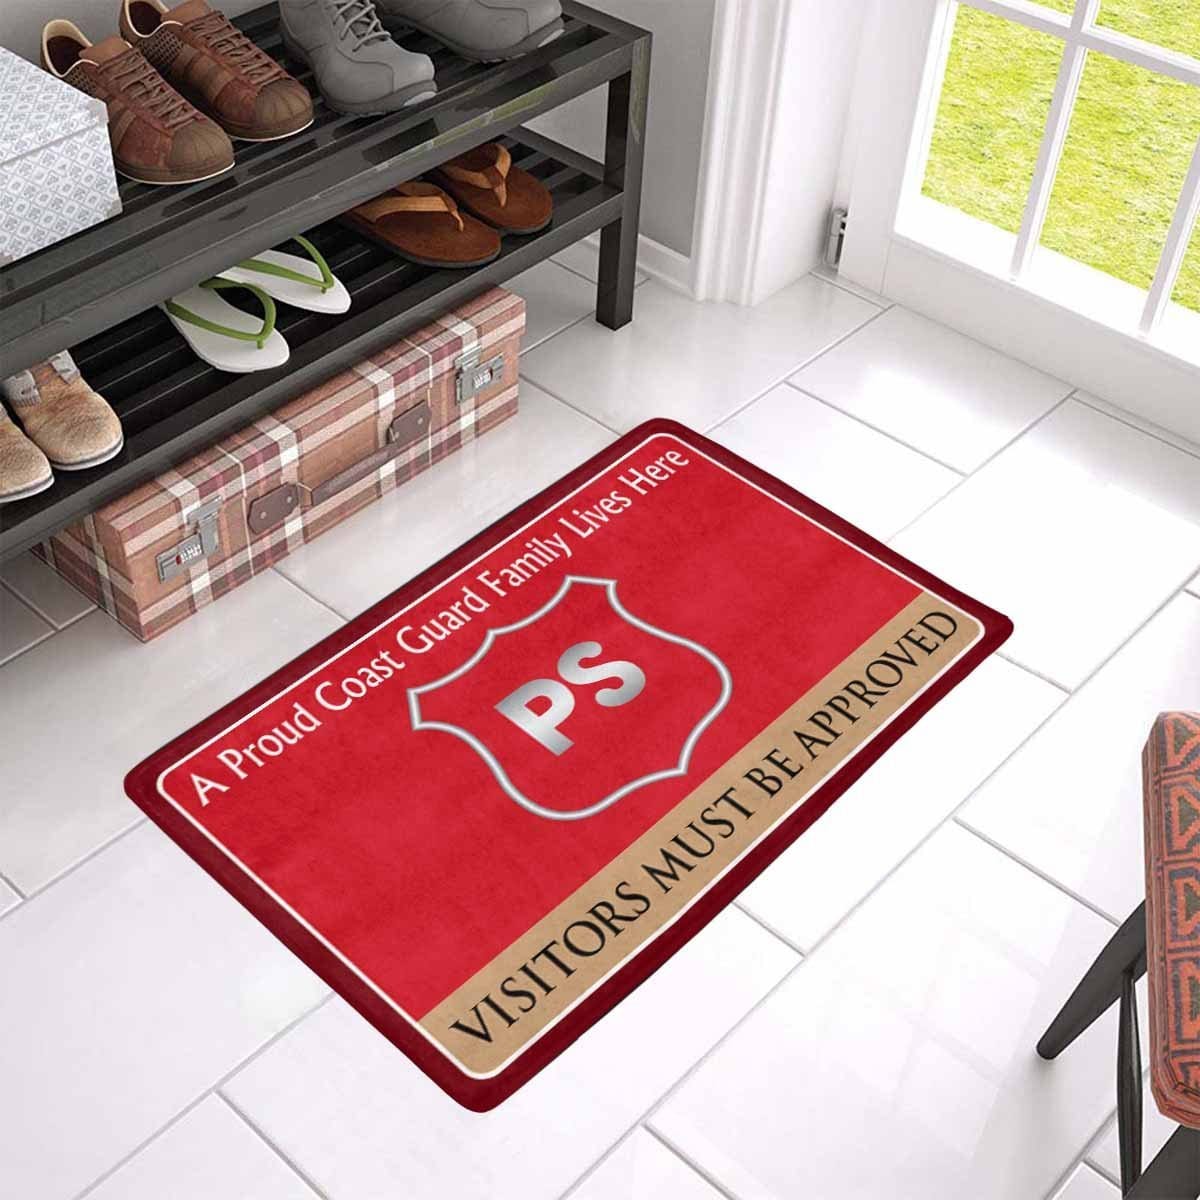 USCG PORT SECURITY SPECIALIST PS Logo Family Doormat - Visitors must be approved (23.6 inches x 15.7 inches)-Doormat-USCG-Rate-Veterans Nation